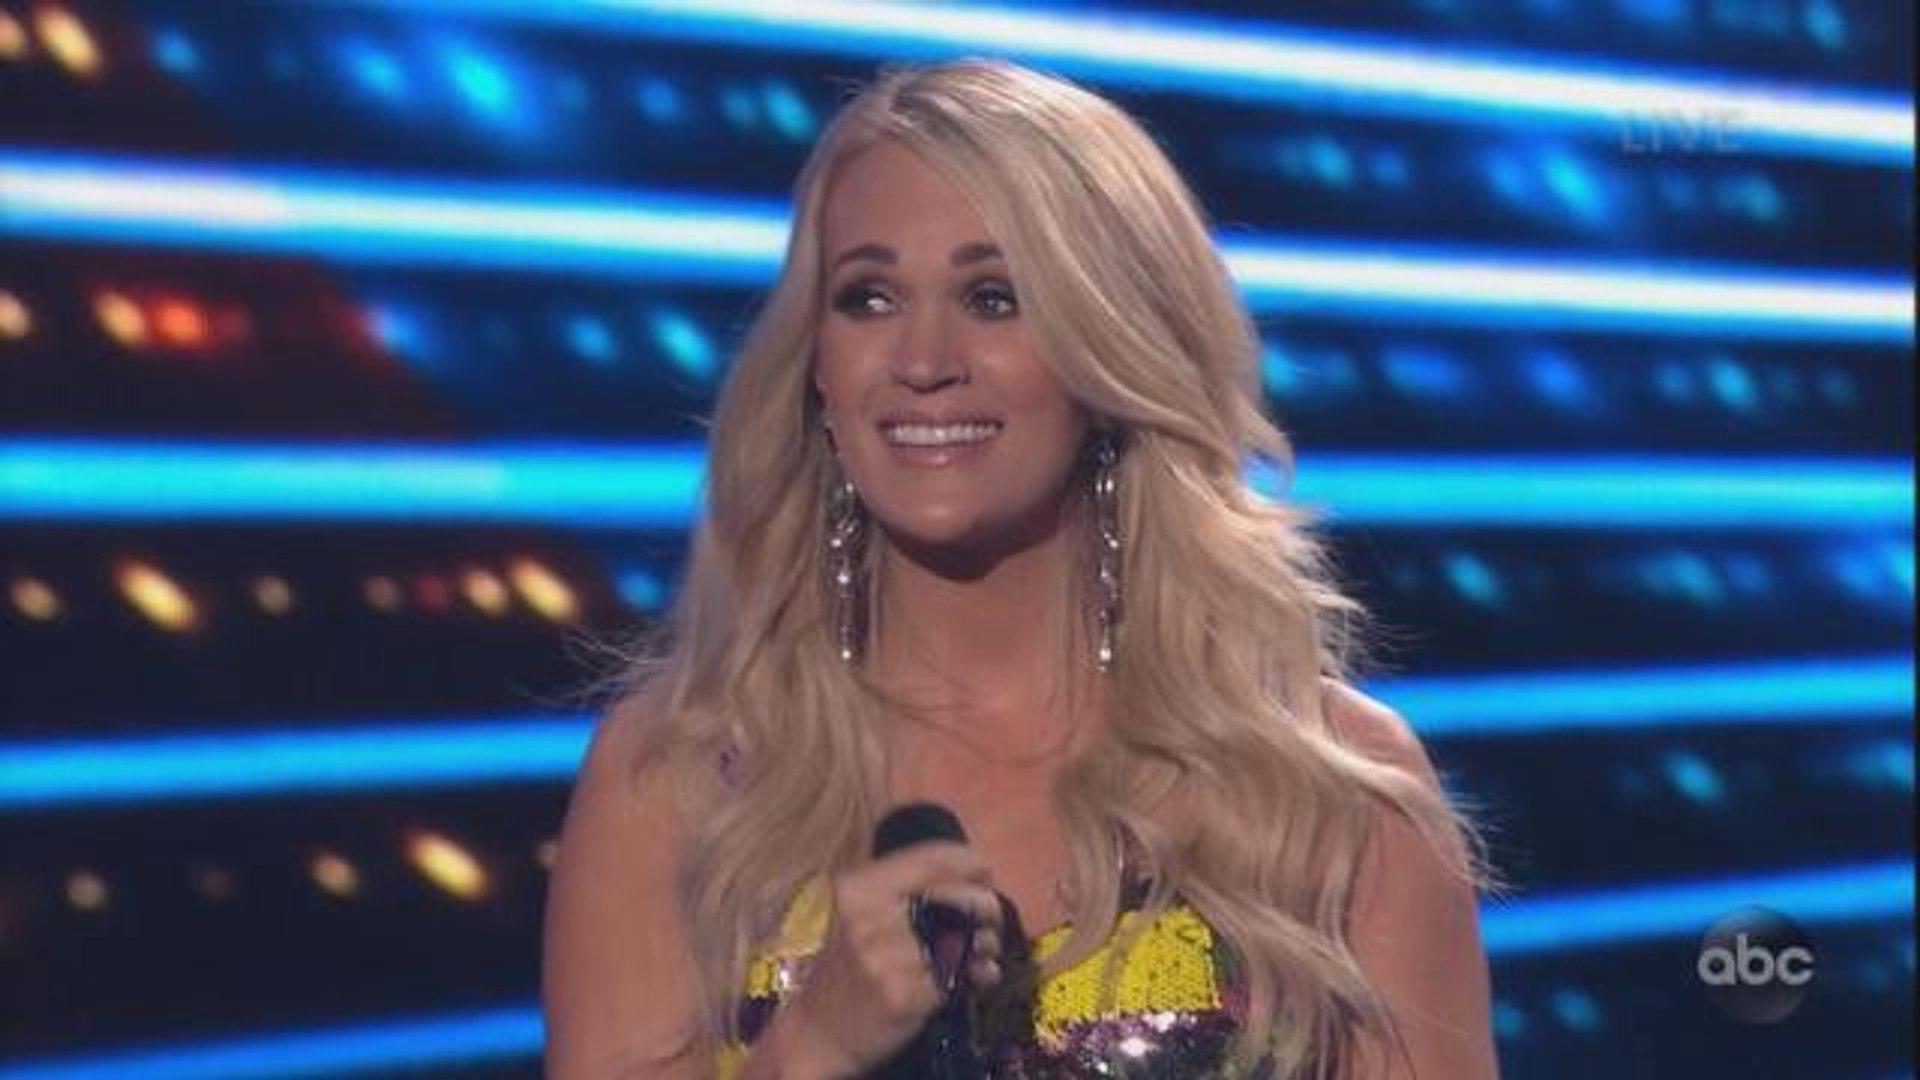 Carrie Underwood Slays Performance of 'Southbound' at 'American Idol' Season 17 Finale